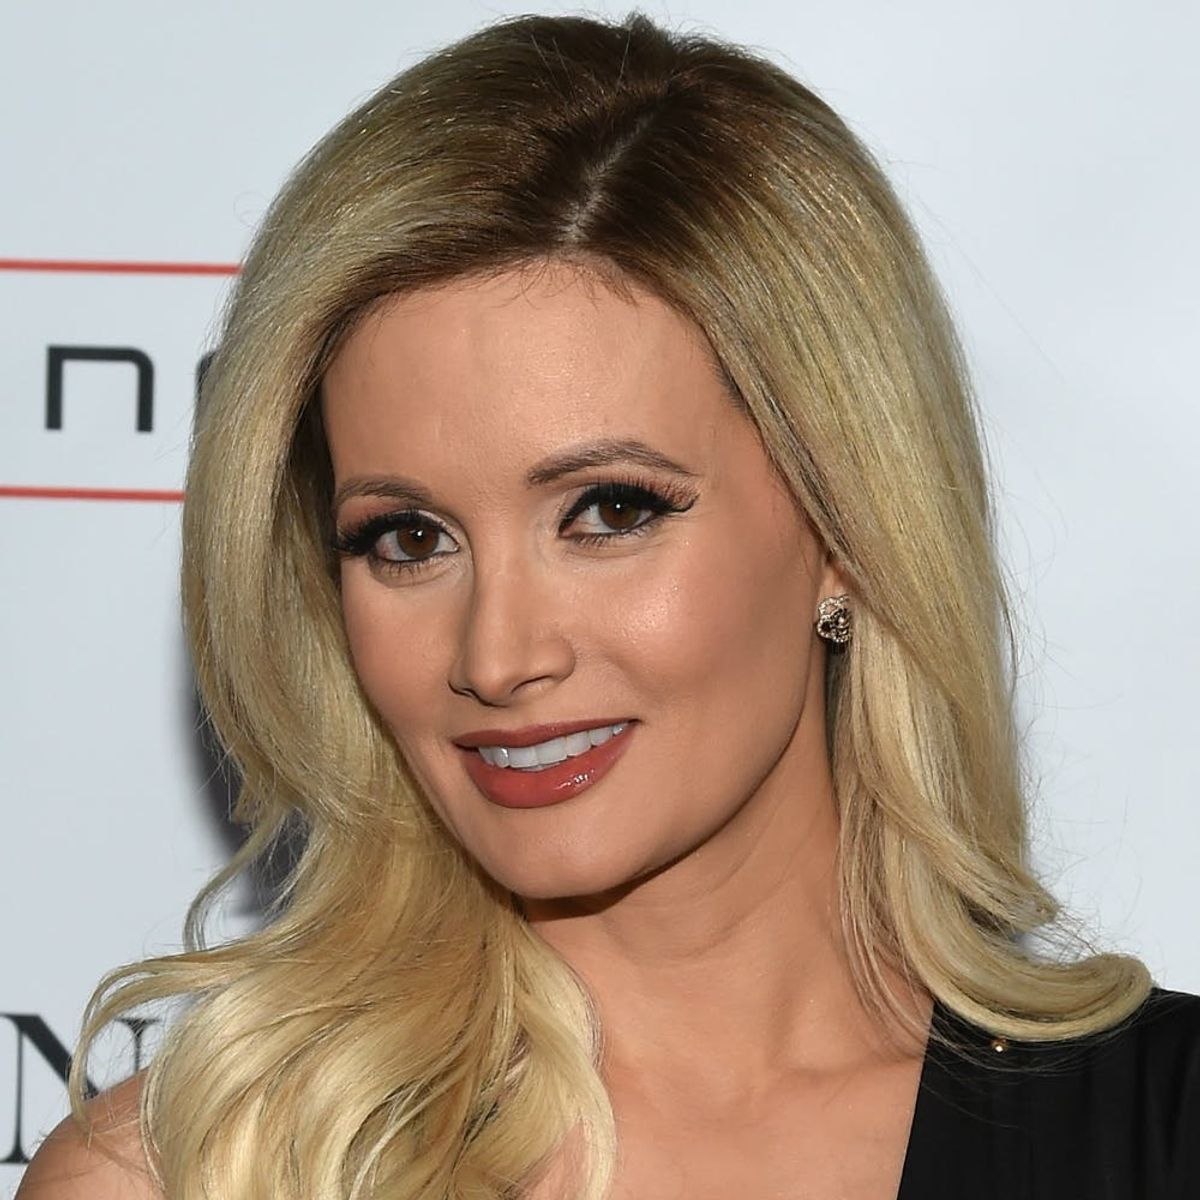 Holly Madison Just Channeled Her Inner Lizzie McGuire and Gave Us Pangs of ’90s Nostaglia